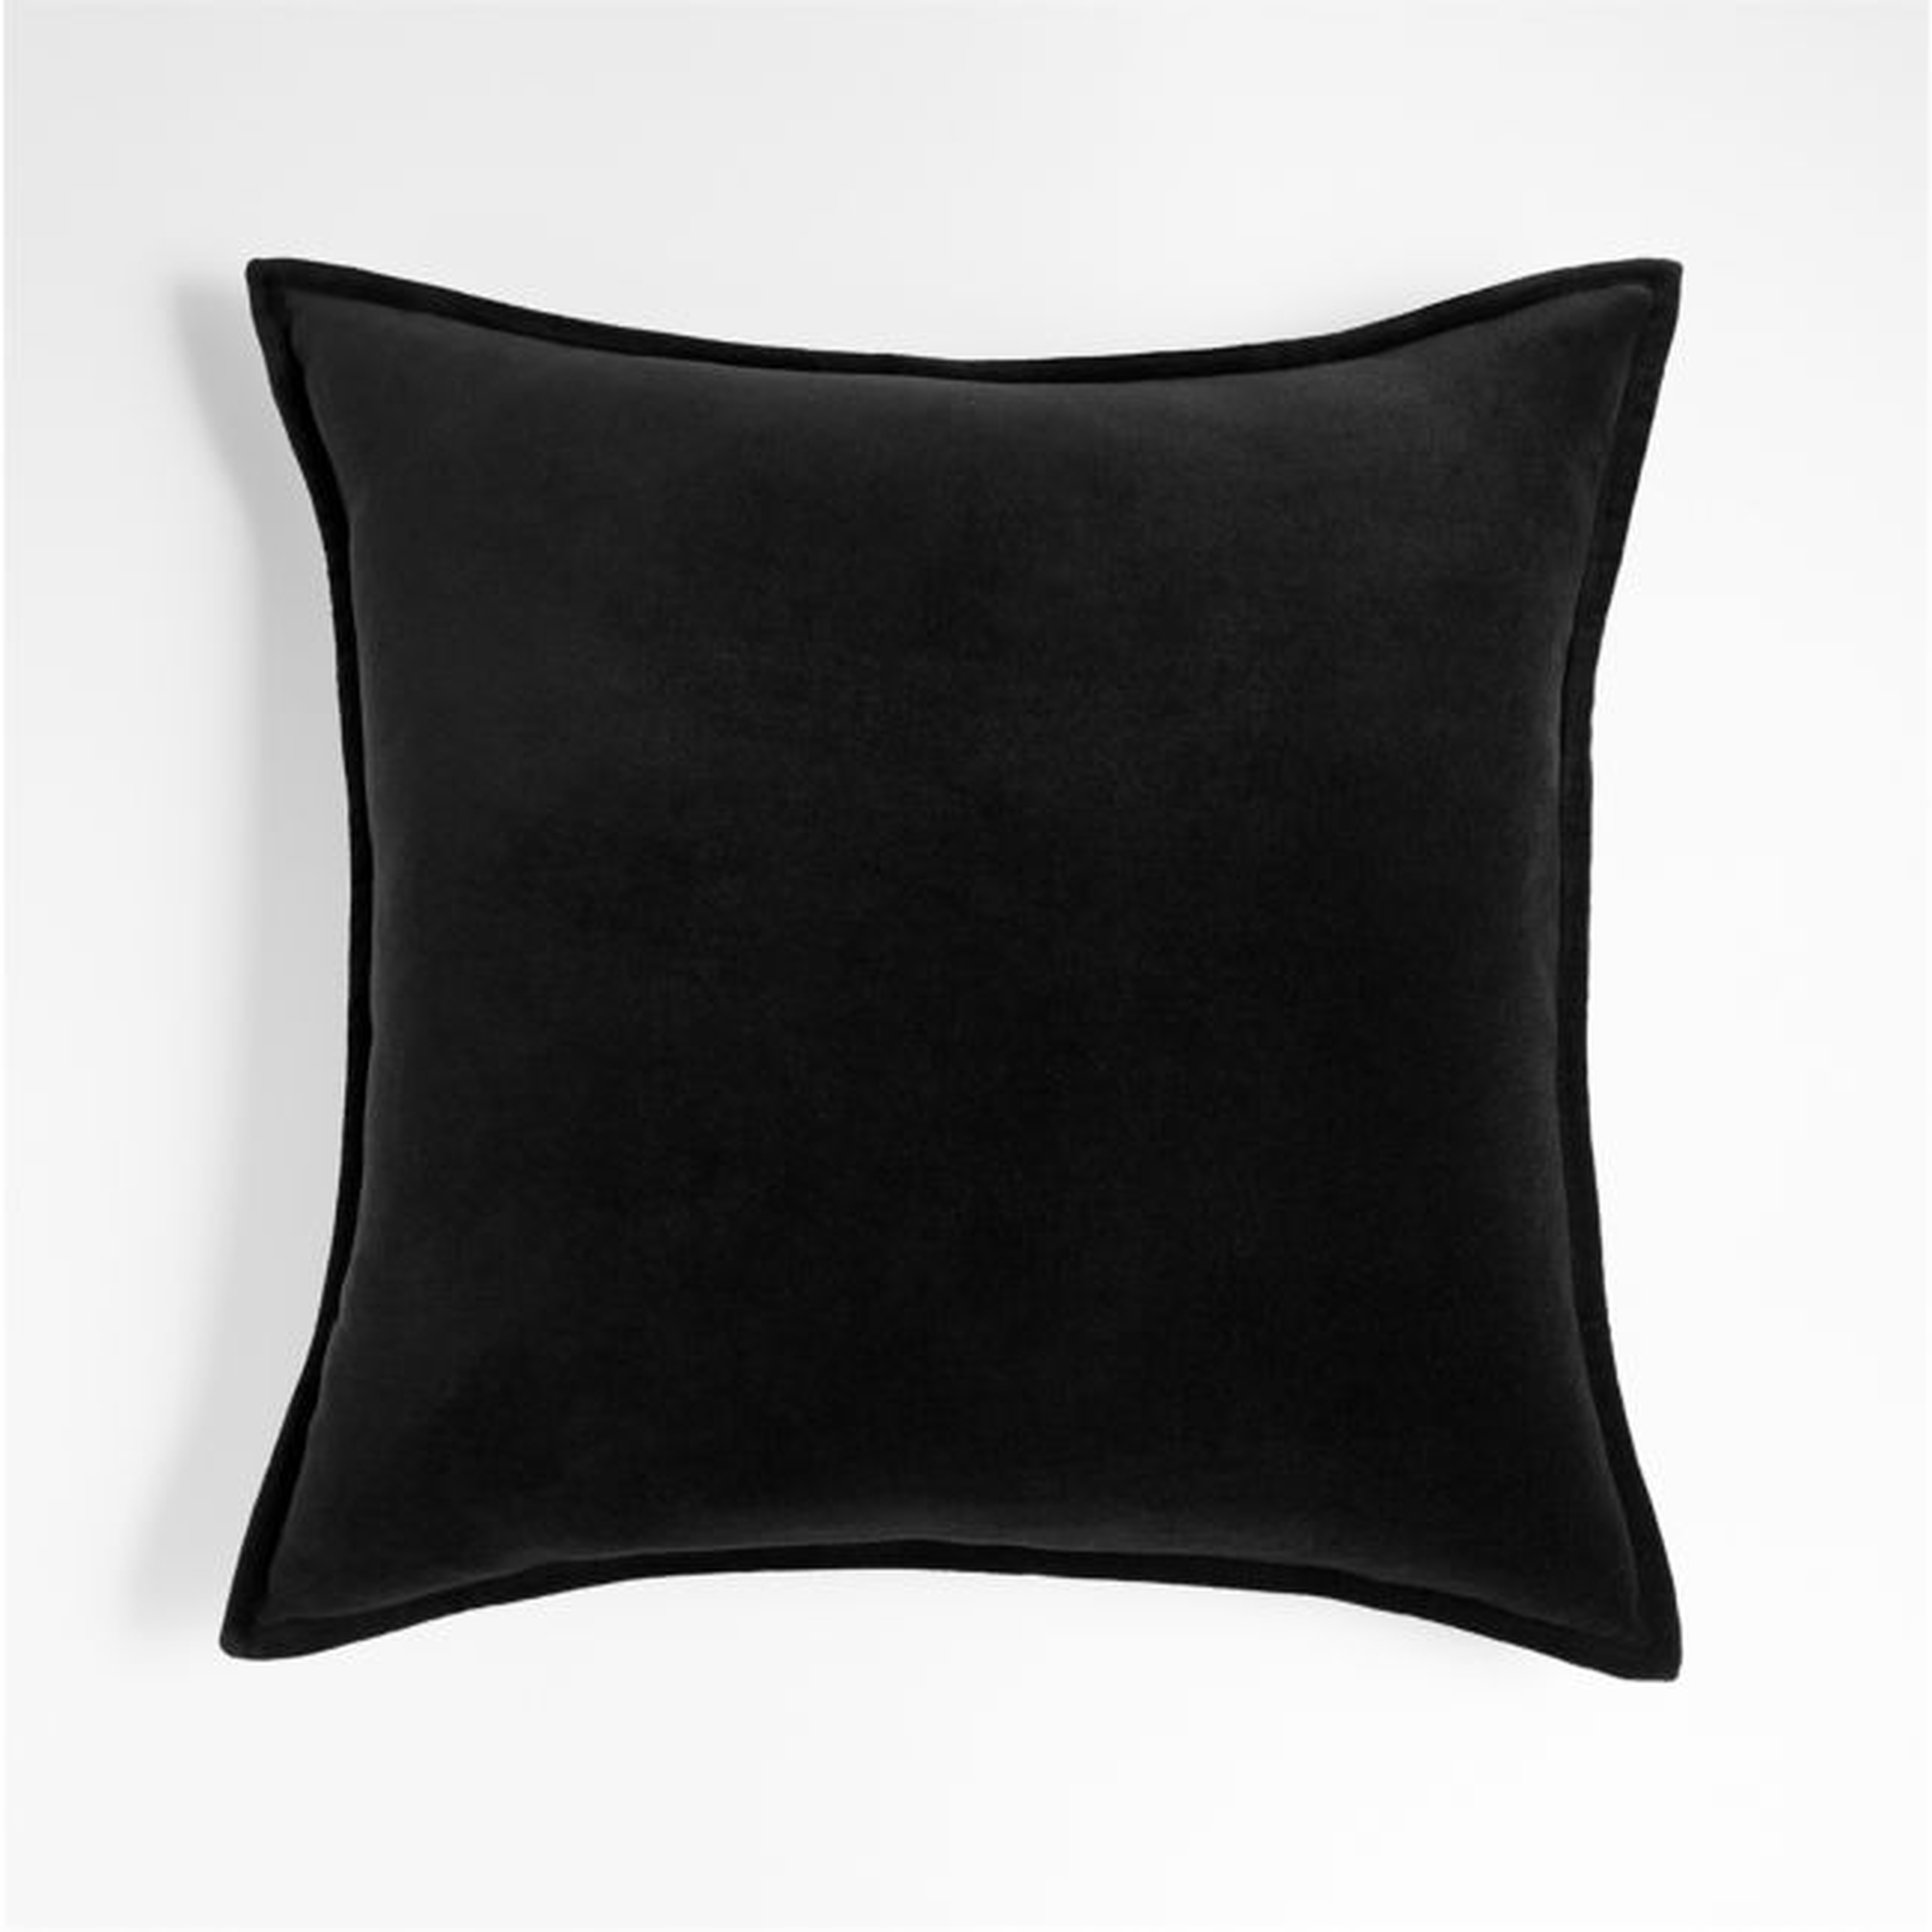 Black 20" Washed Cotton Velvet Pillow Cover - Crate and Barrel